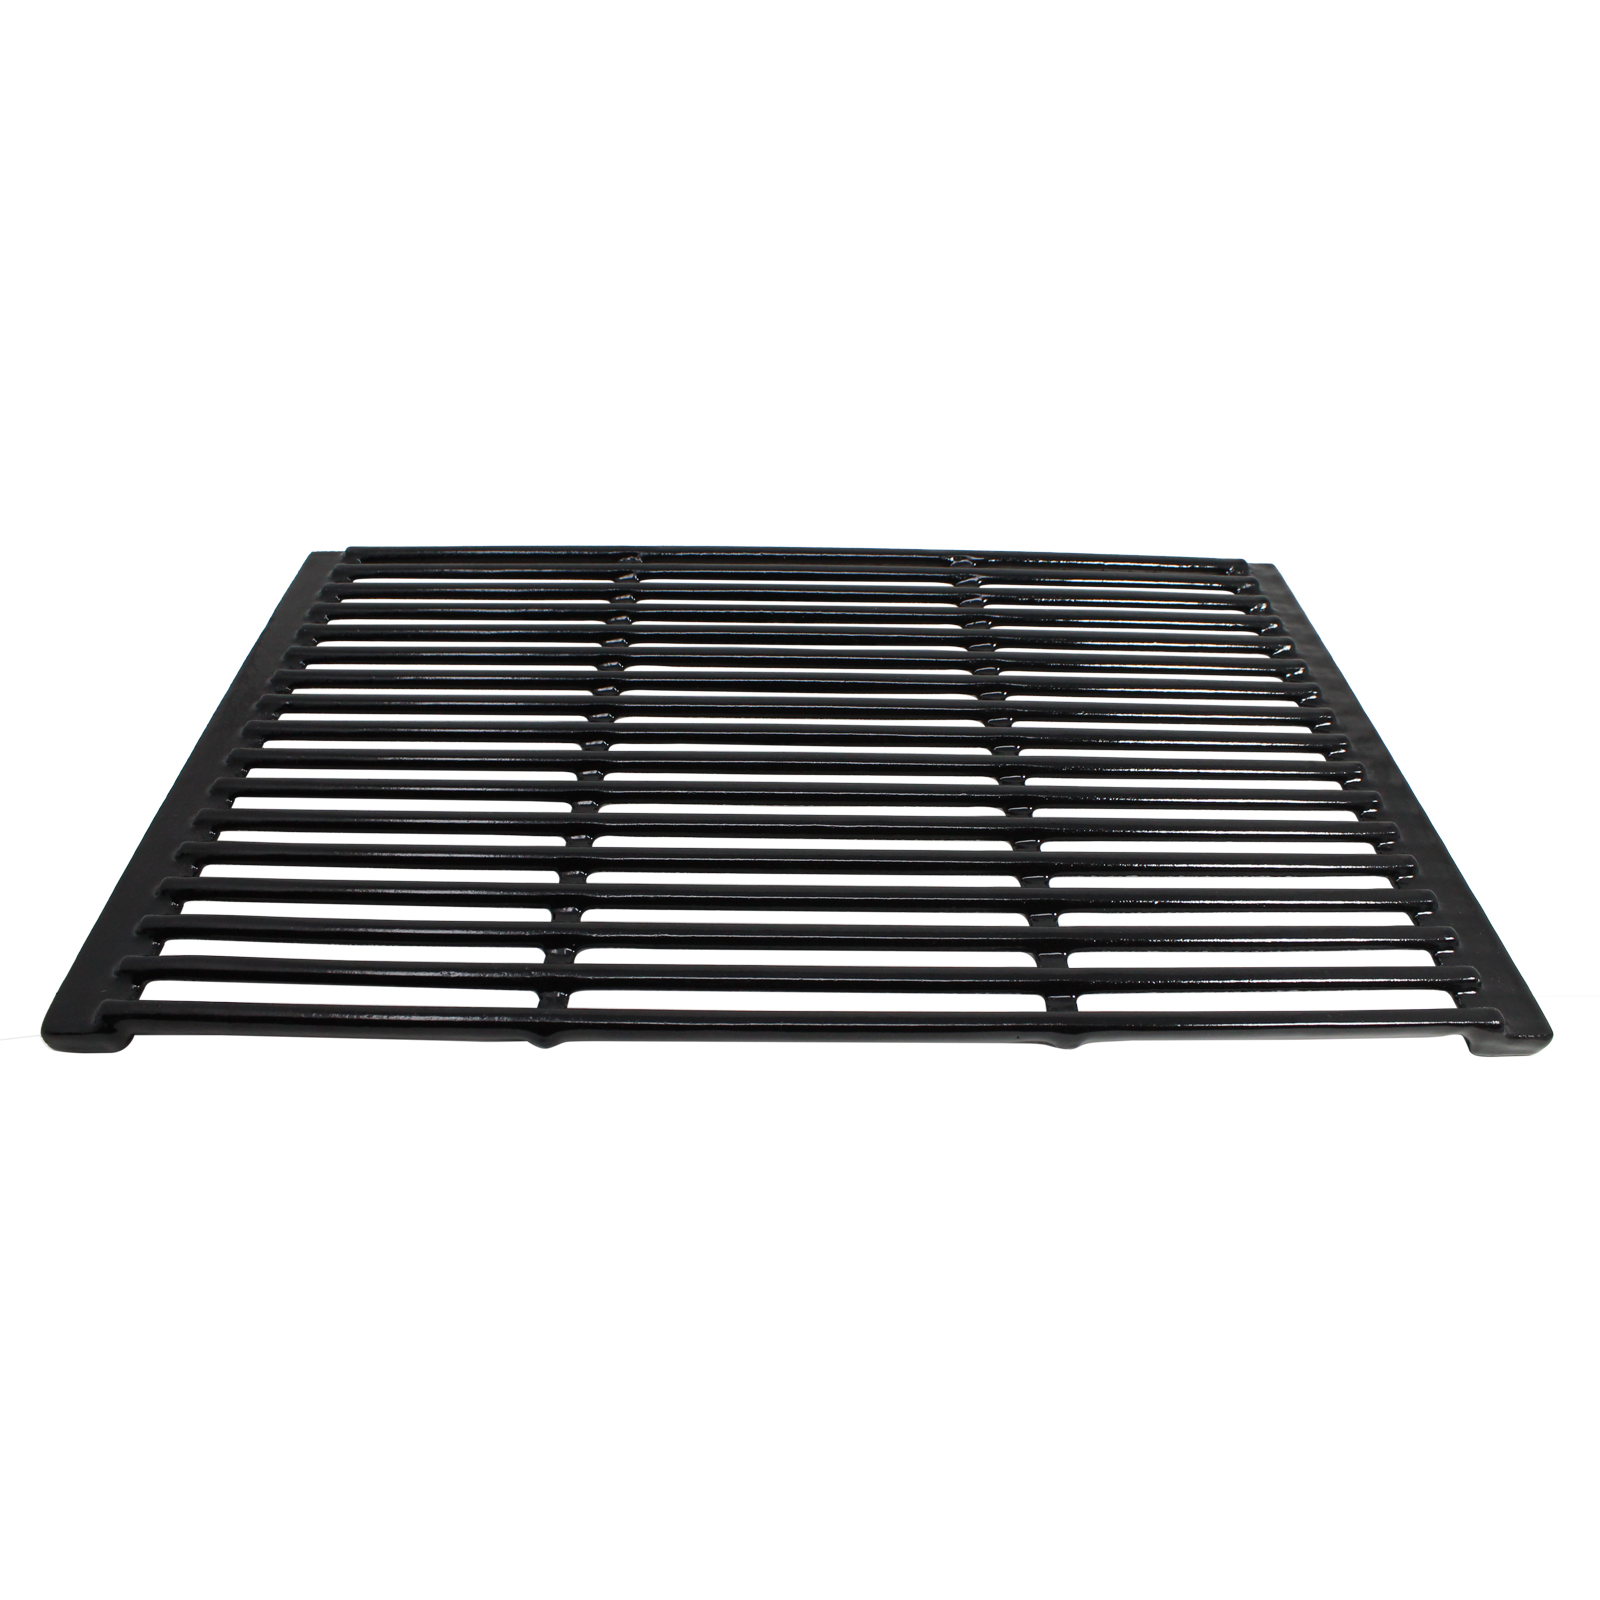 2-Pack BBQ Grill Cooking Grates Replacement Parts for Brinkmann 2400 - Compatible Barbeque Porcelain Enameled Cast Iron Grid 19" - image 3 of 4